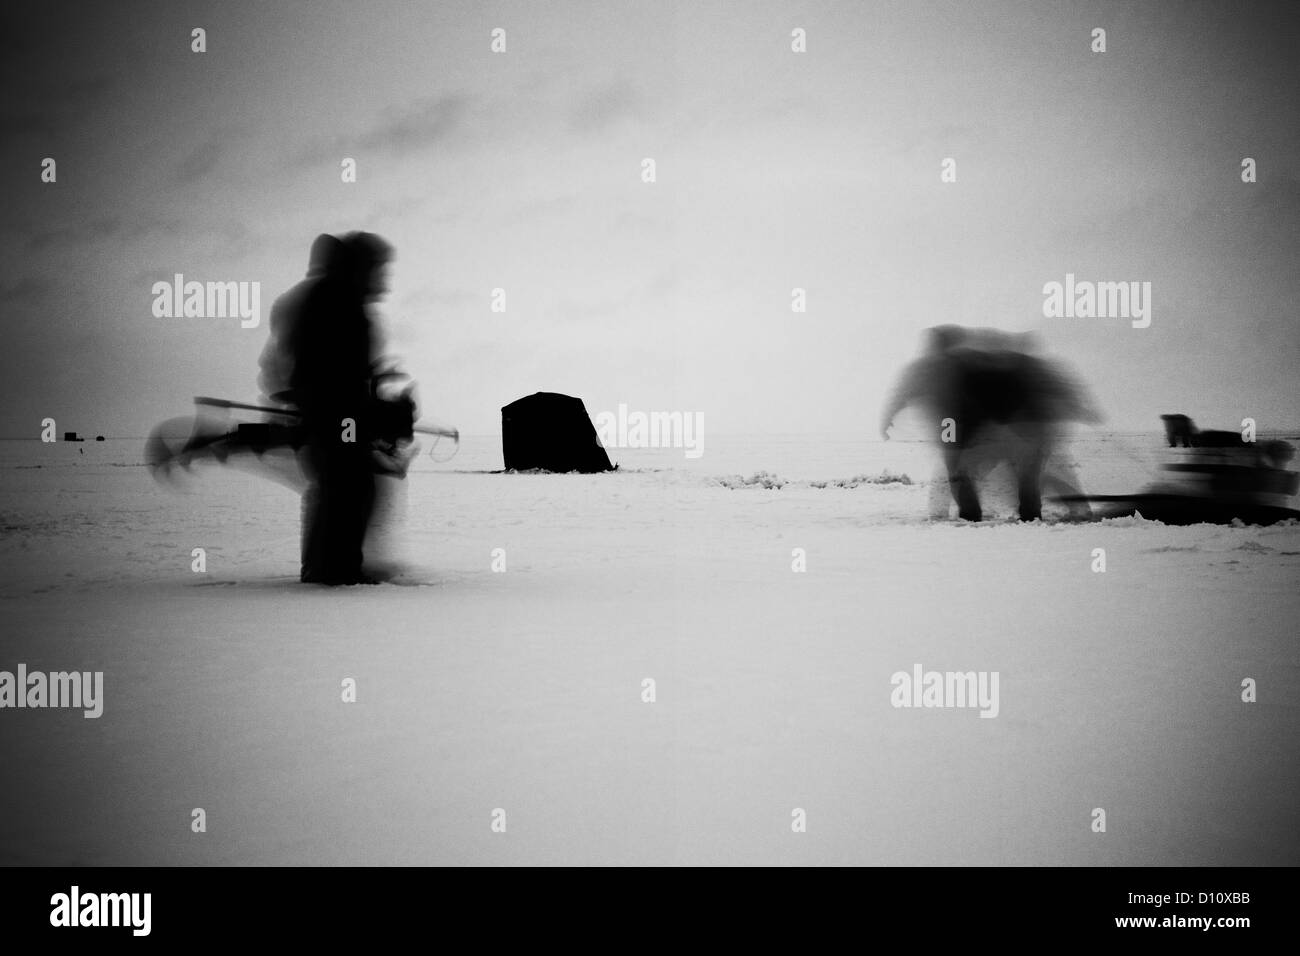 Blurred motion of people walking on snow Stock Photo